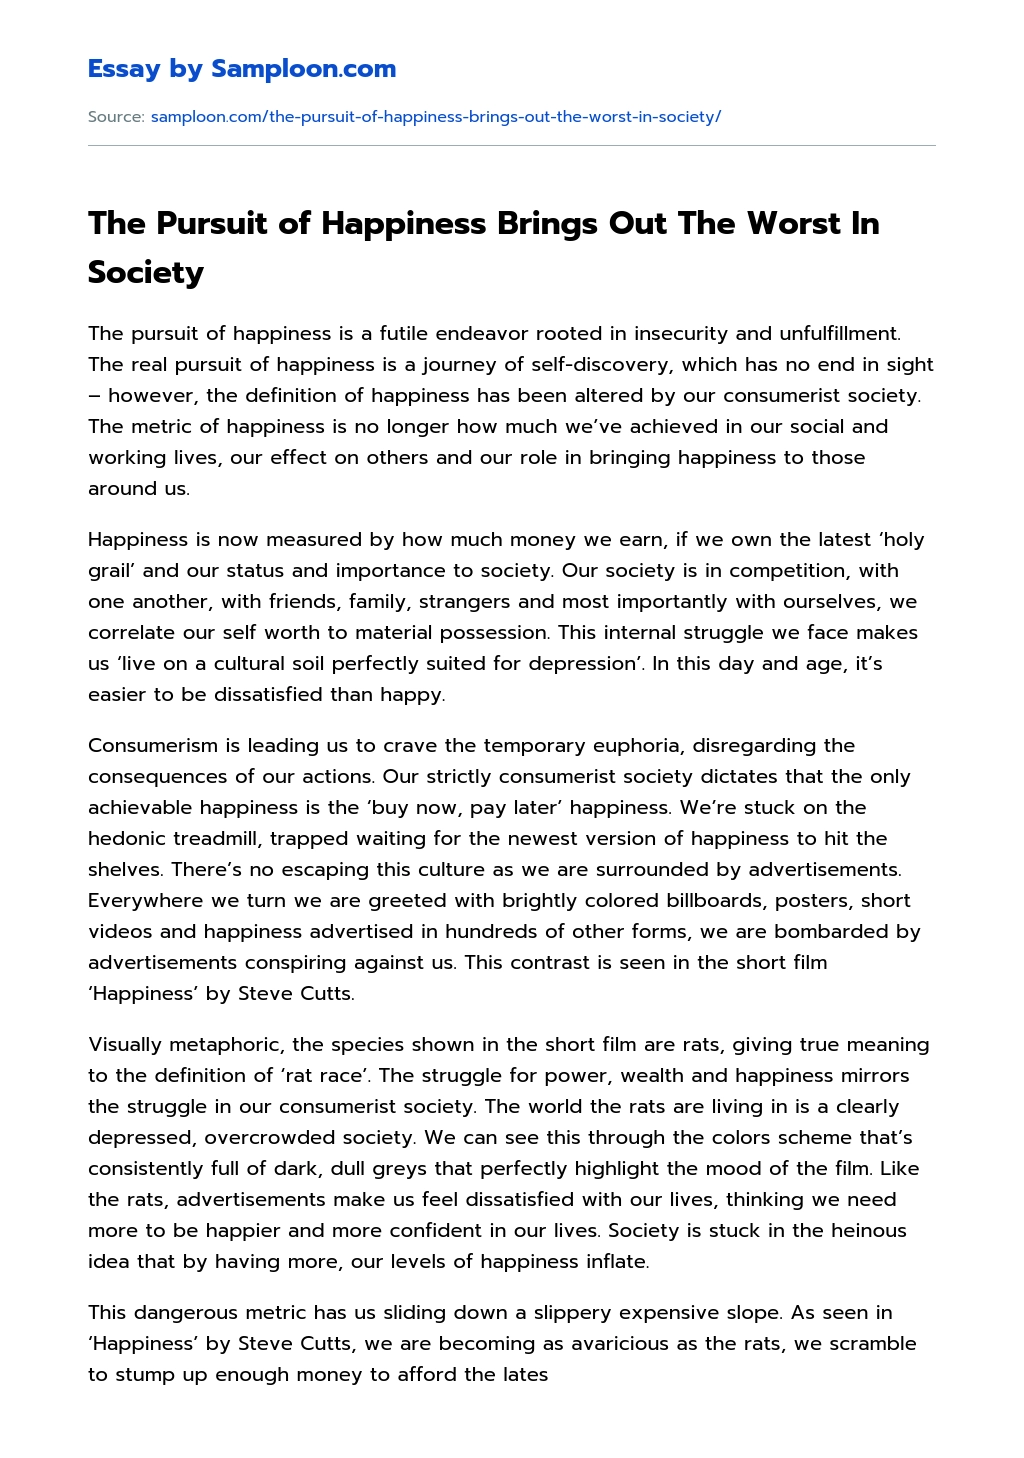 The Pursuit of Happiness Brings Out The Worst In Society essay